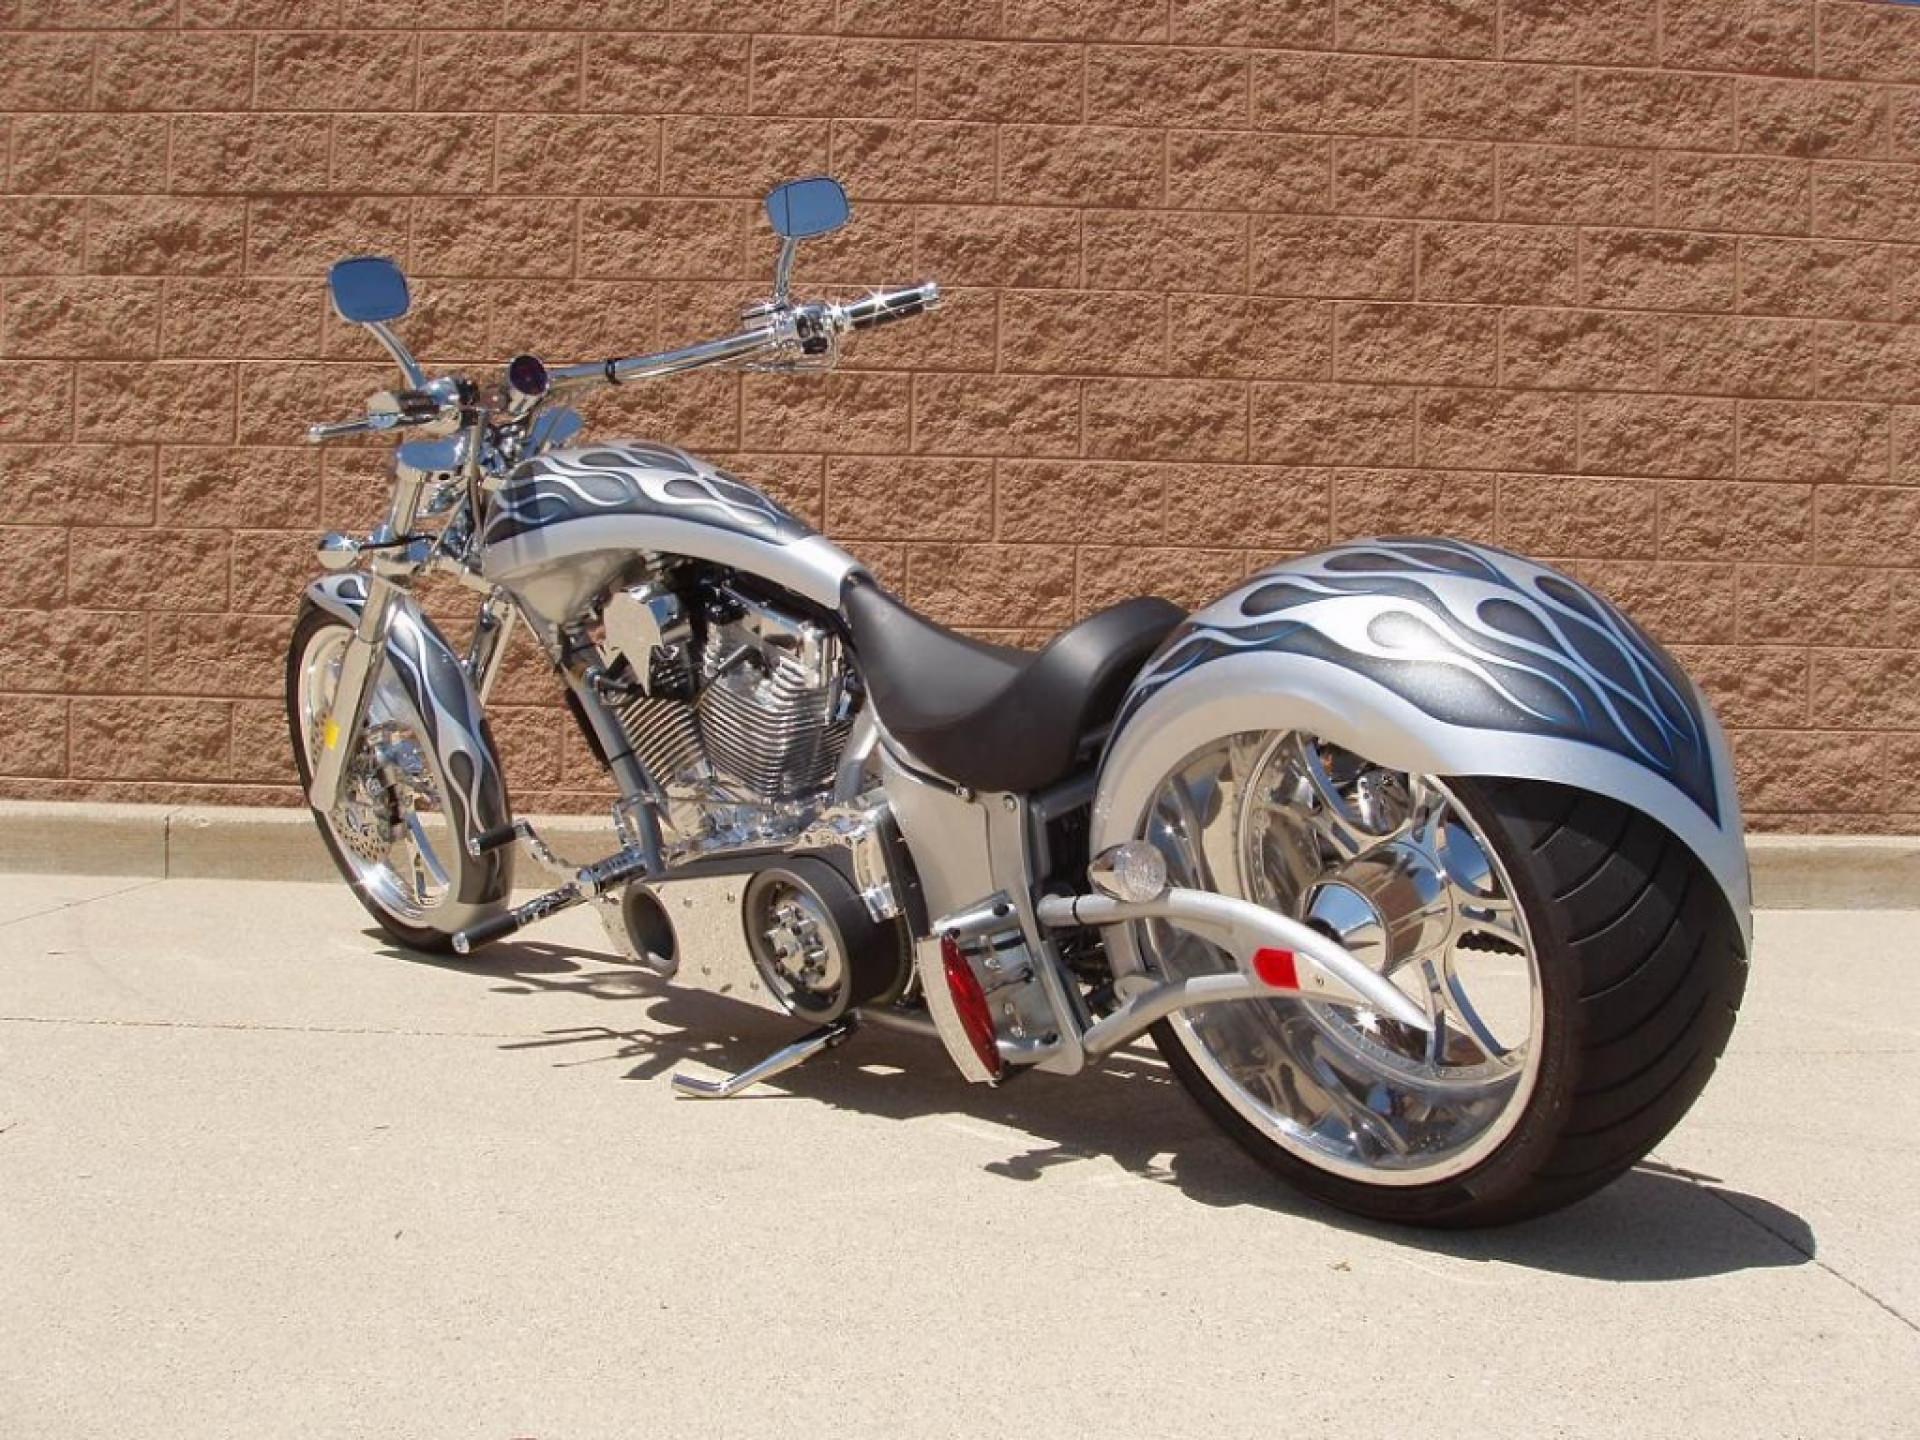 39214-choppers-motorcycle-design_1920x1080